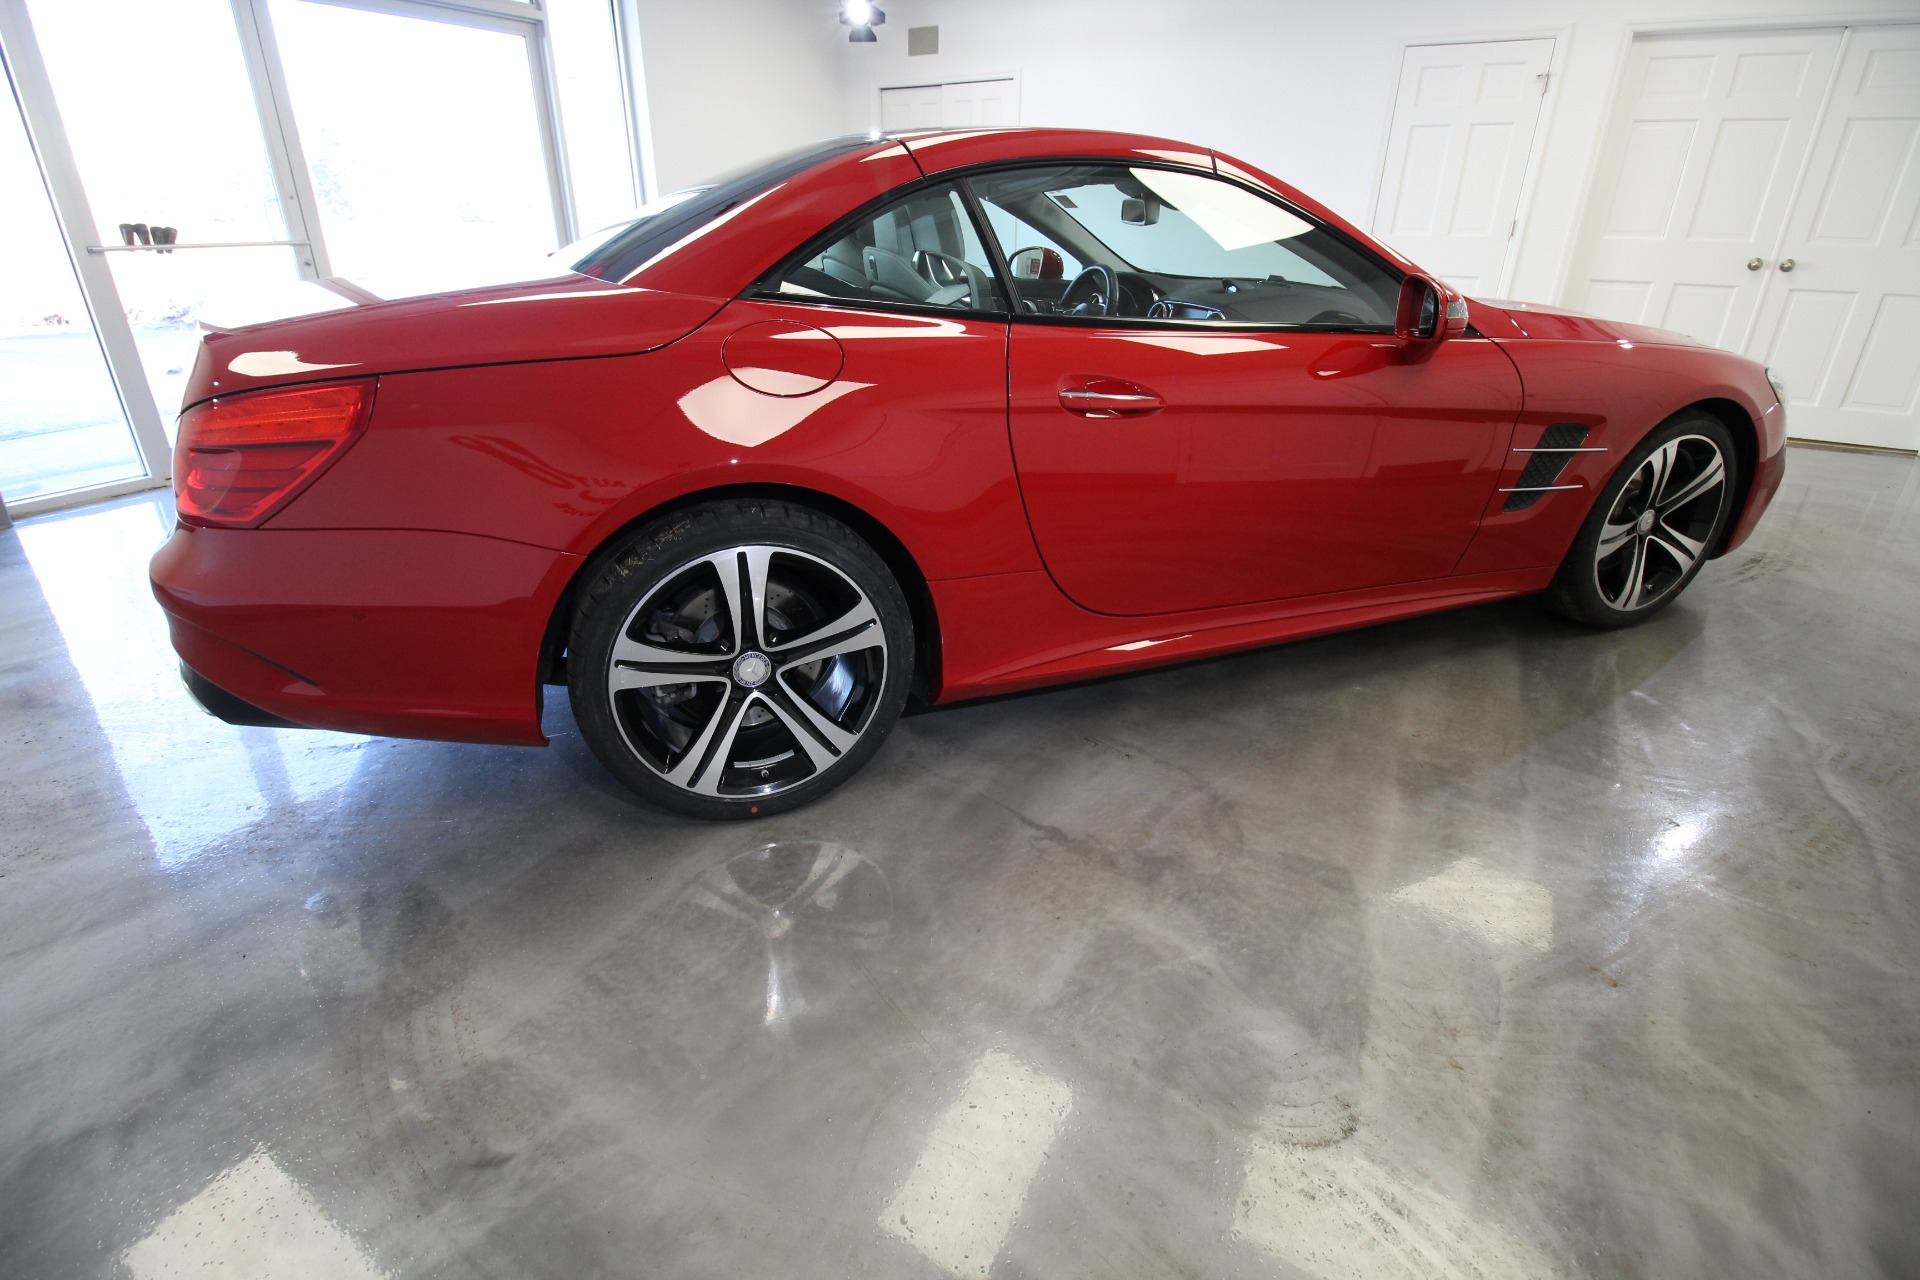 Used 2017 RED Mercedes-Benz SL-Class SL450 SUPER RARE COLOR BEST COLOR COMBO | Albany, NY